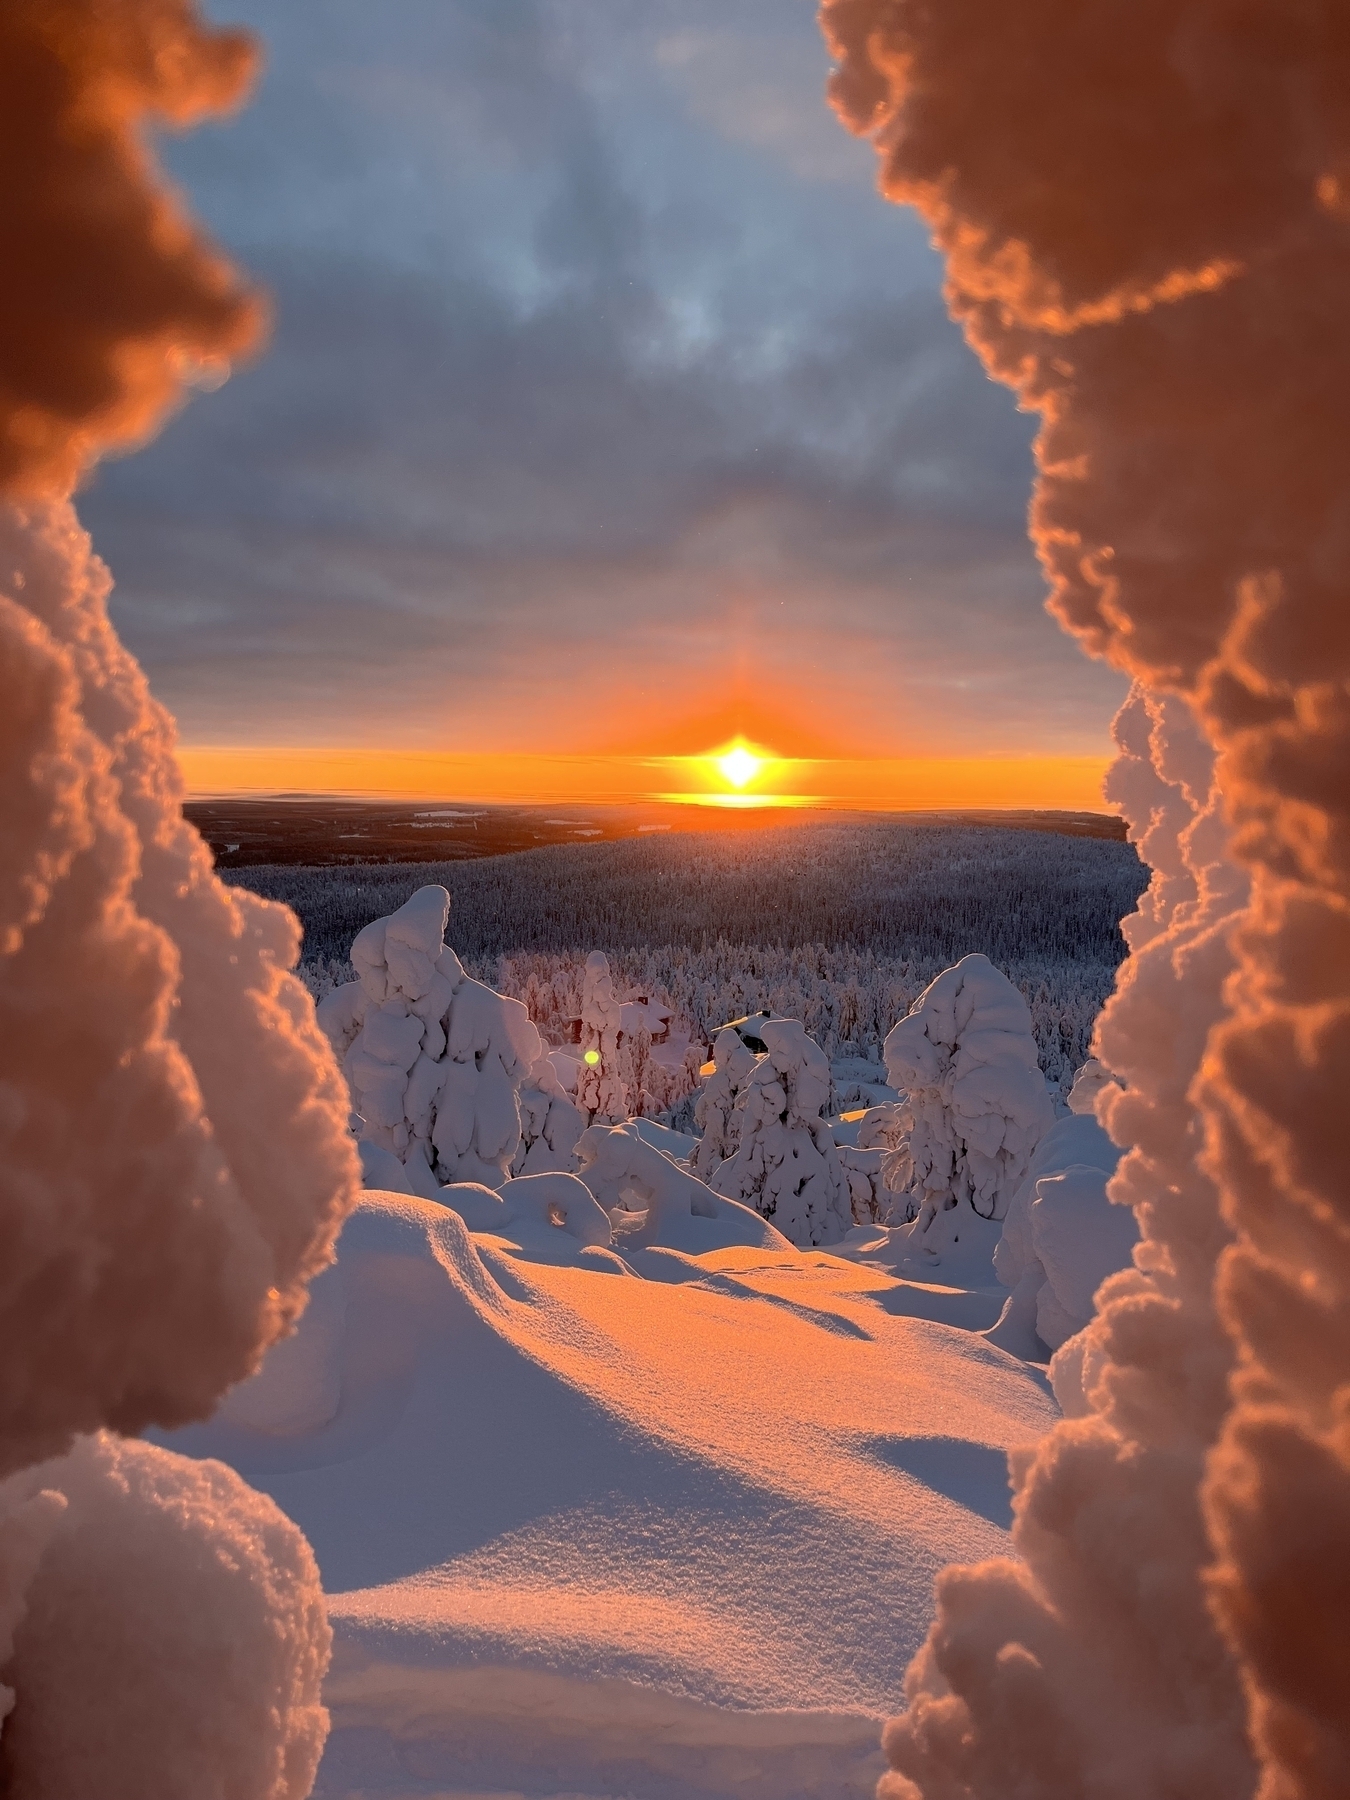 Iso-Syöte sunset sht between a hole in snow